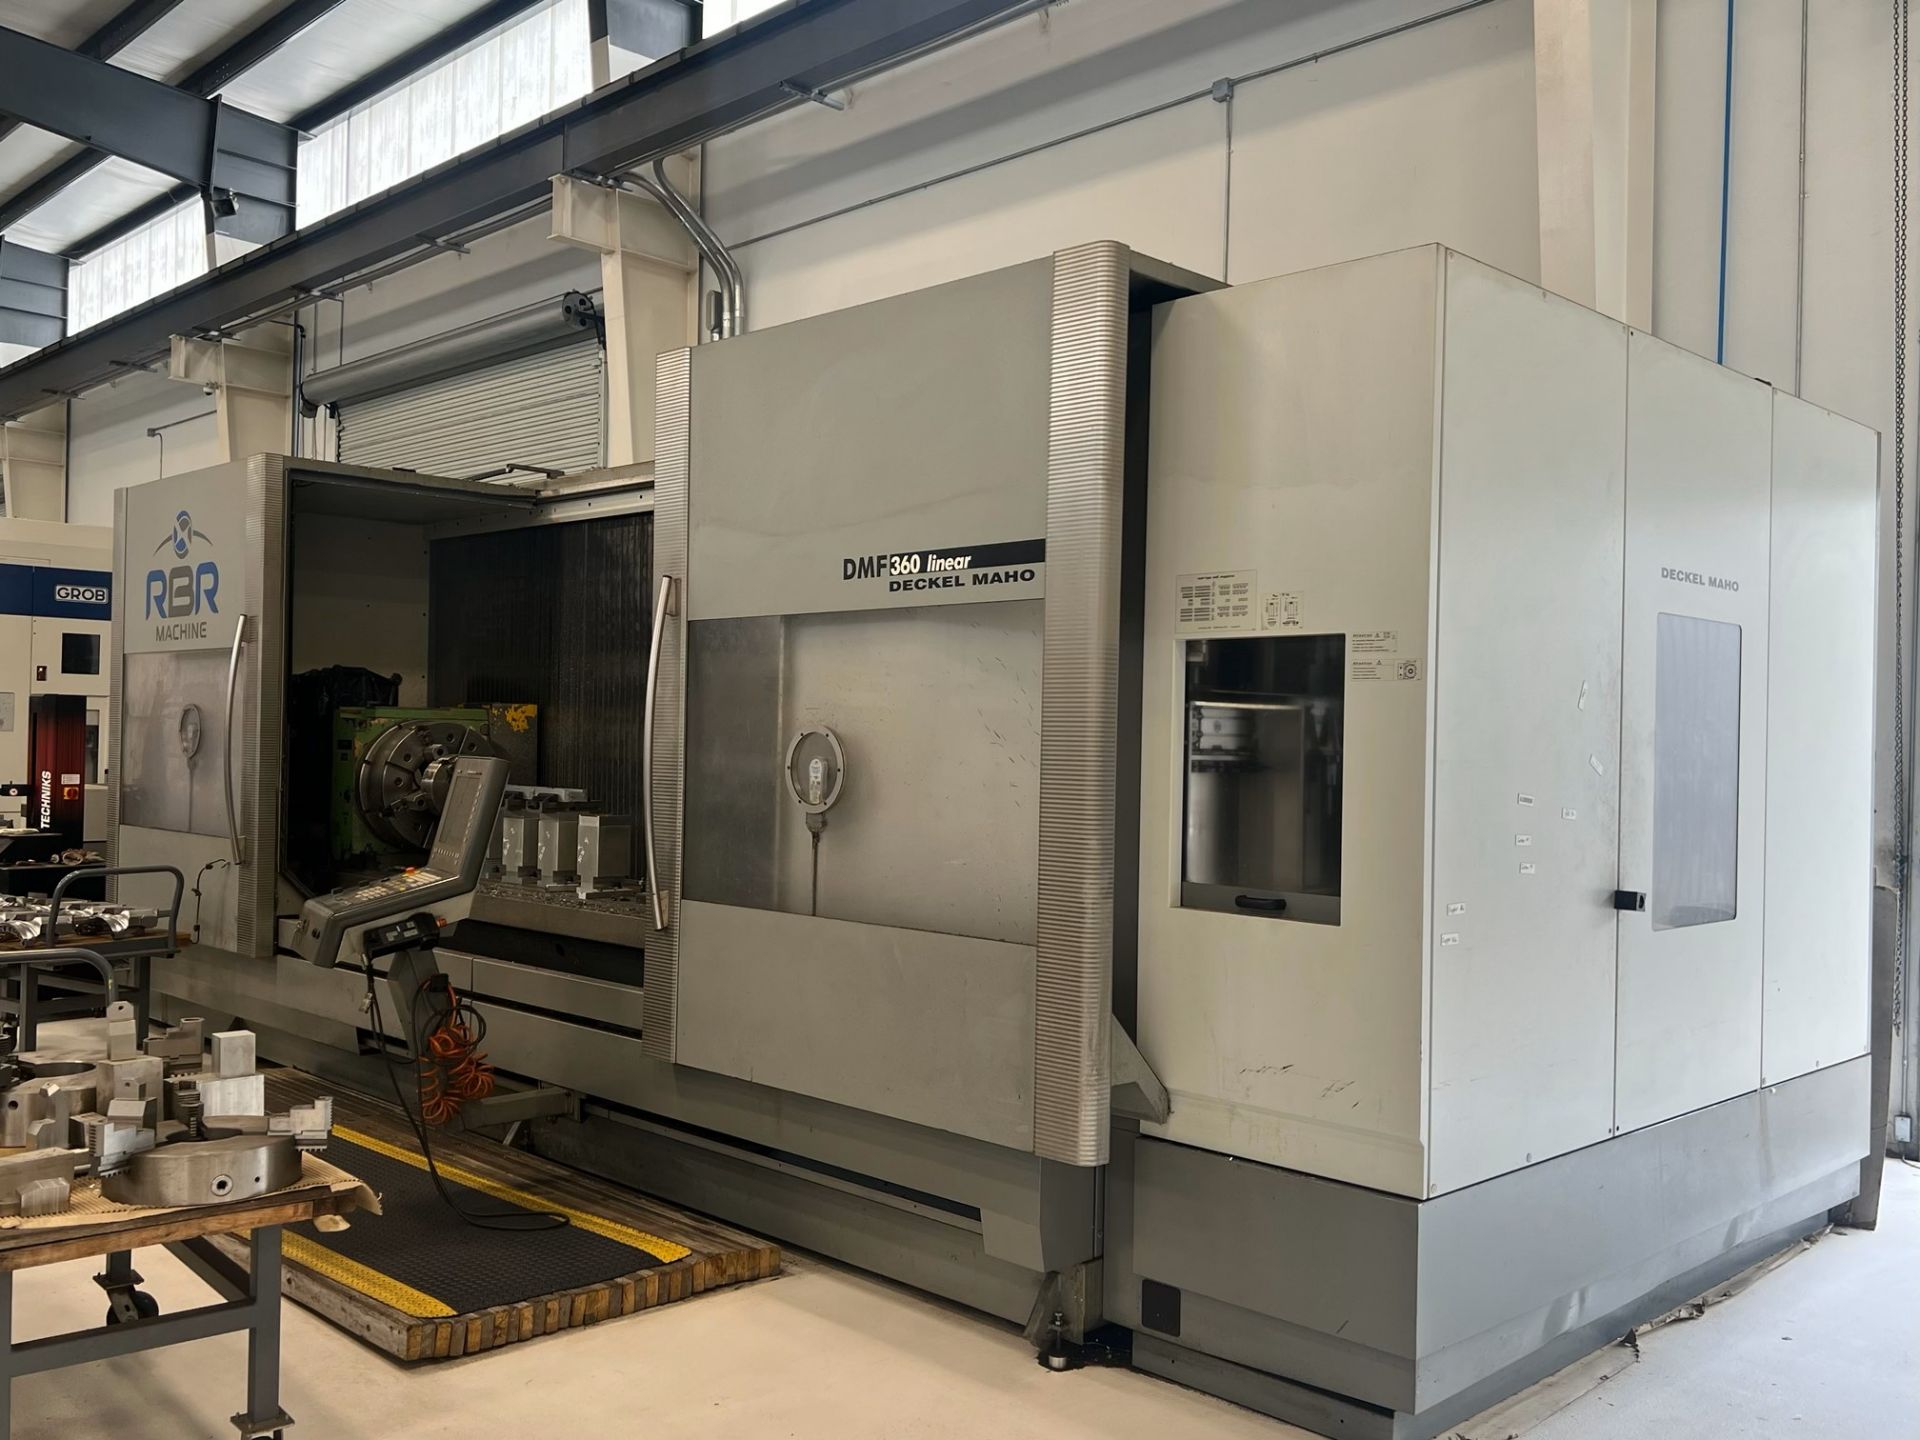 CNC VERTICAL MACHINING CENTER, DECKEL MAHO MDL. DMF360 LINEAR, Mfg. 2008, milling feature w/